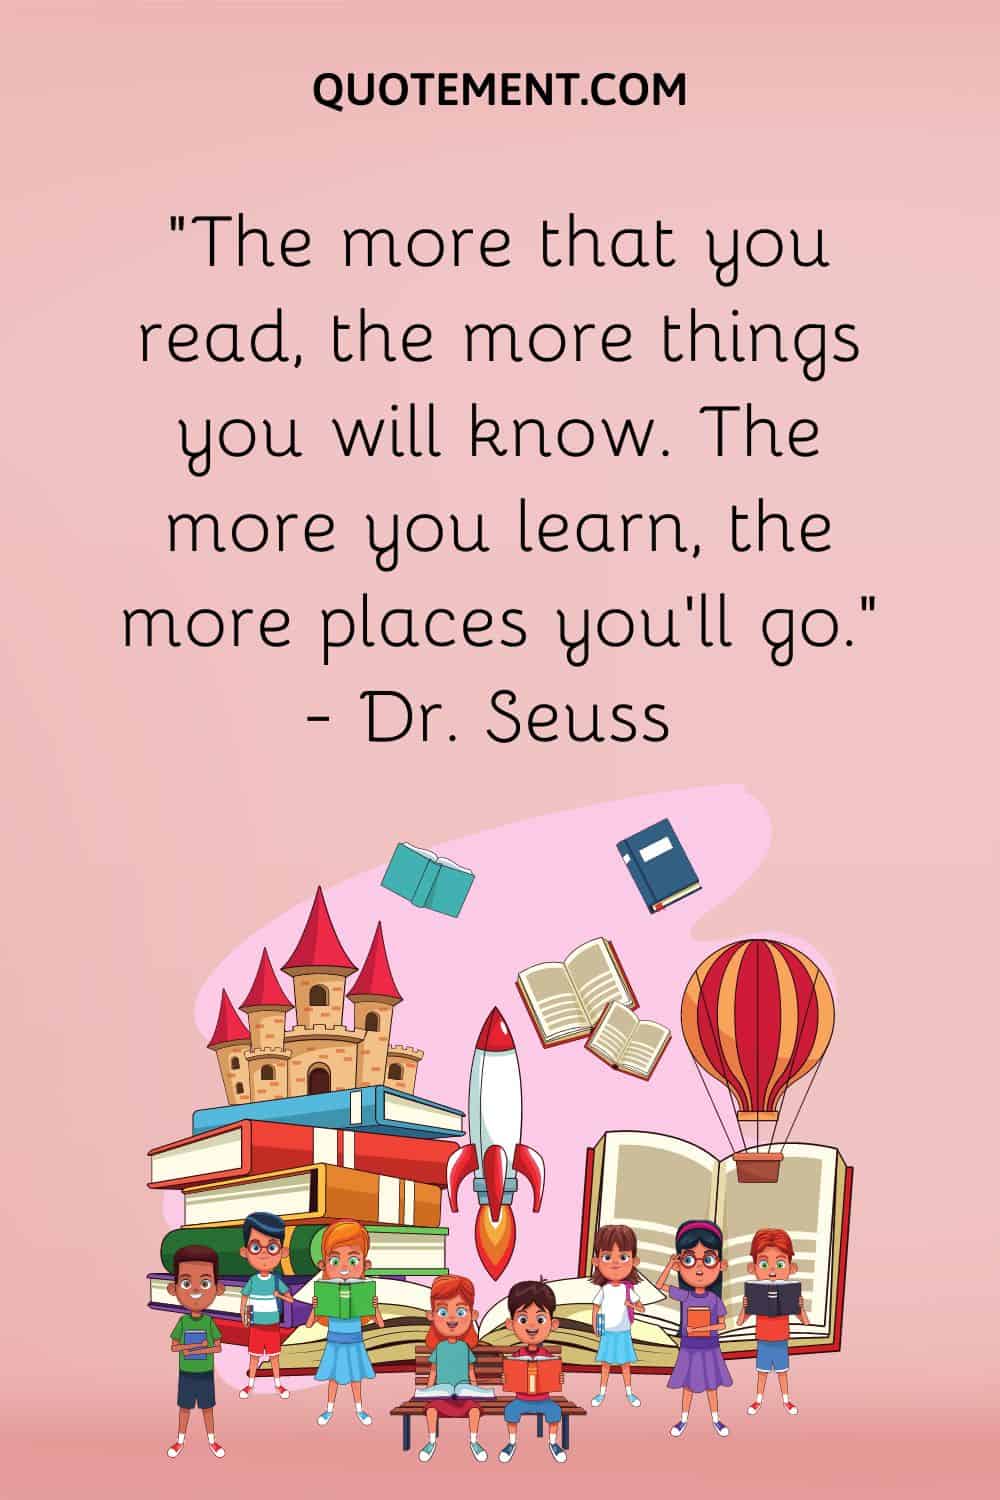 “The more that you read, the more things you will know. The more you learn, the more places you’ll go.” — Dr. Seuss